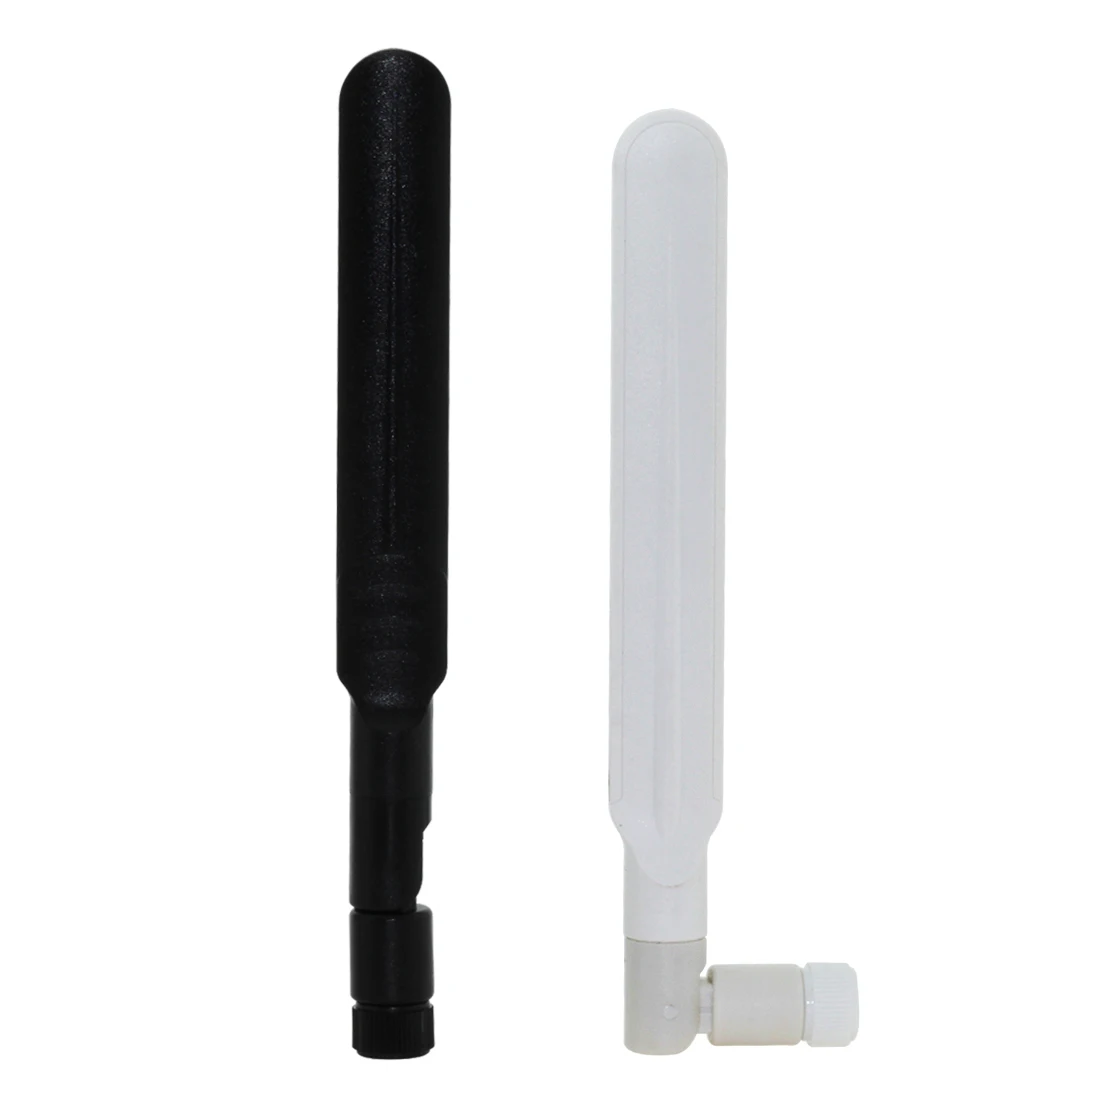 

1PC 700-2700MHZ LTE 4G Antenna 5dbi OMNI RP SMA Male Plug Connector Foldable Oars Flat Aerial 16cm White Black Color